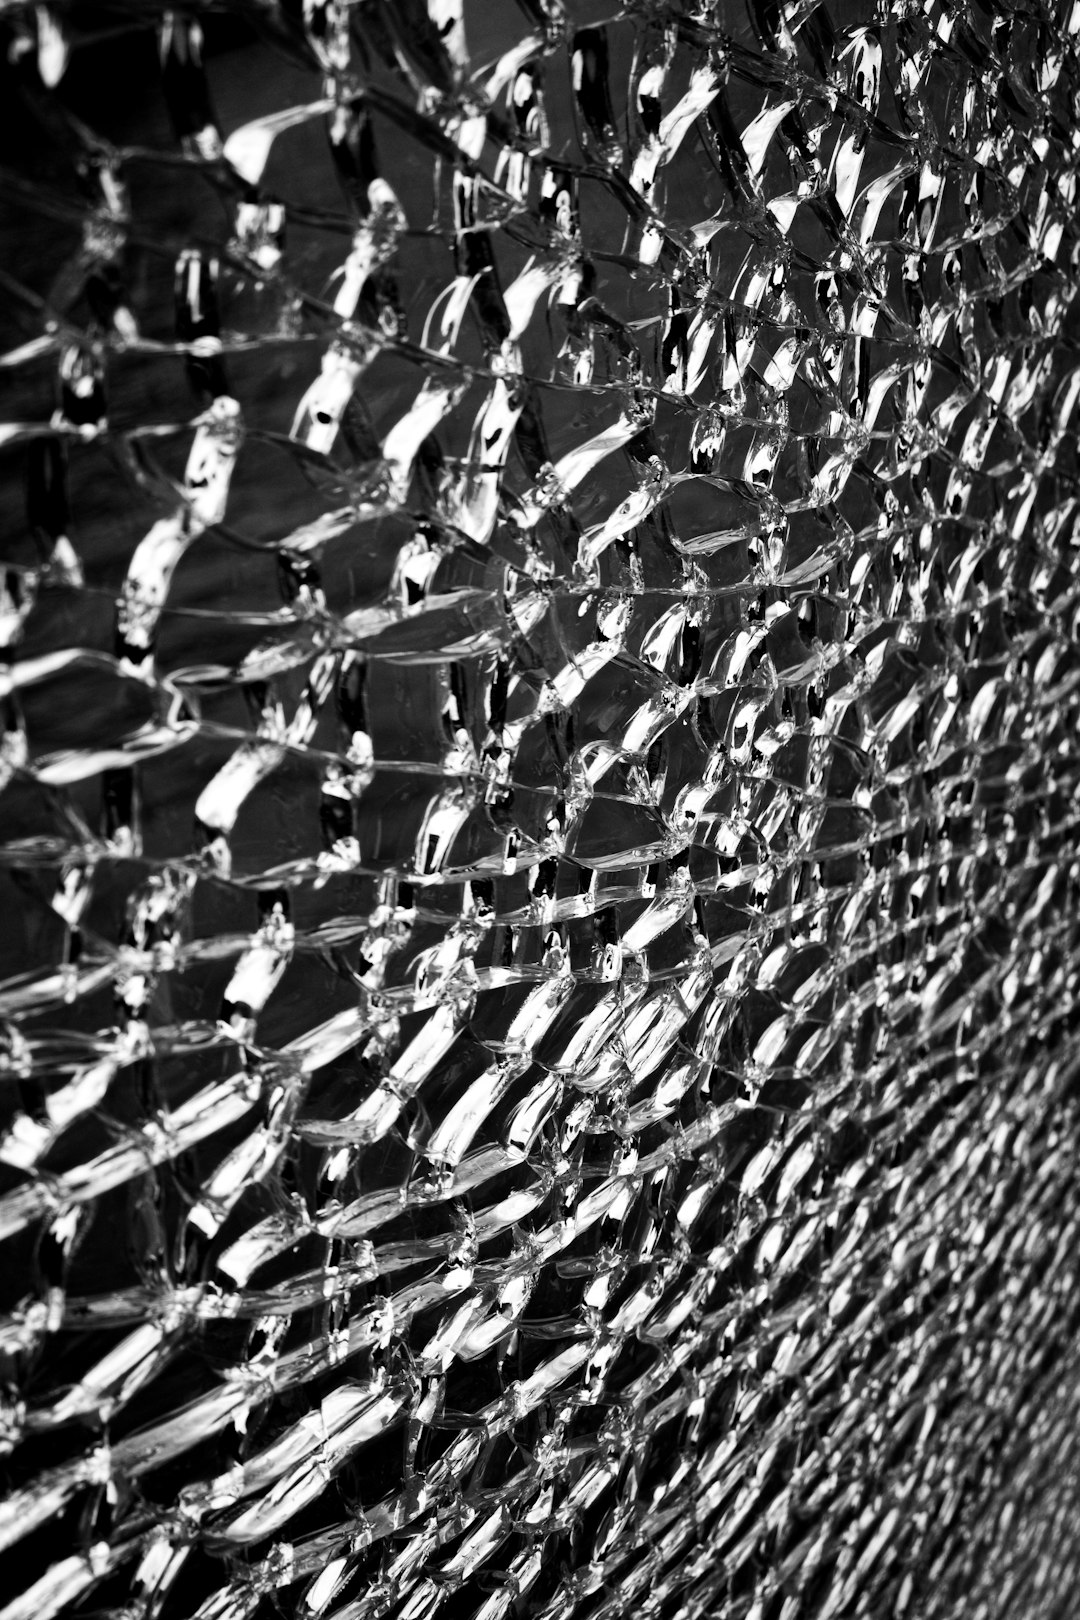 grayscale photo of a chain link fence